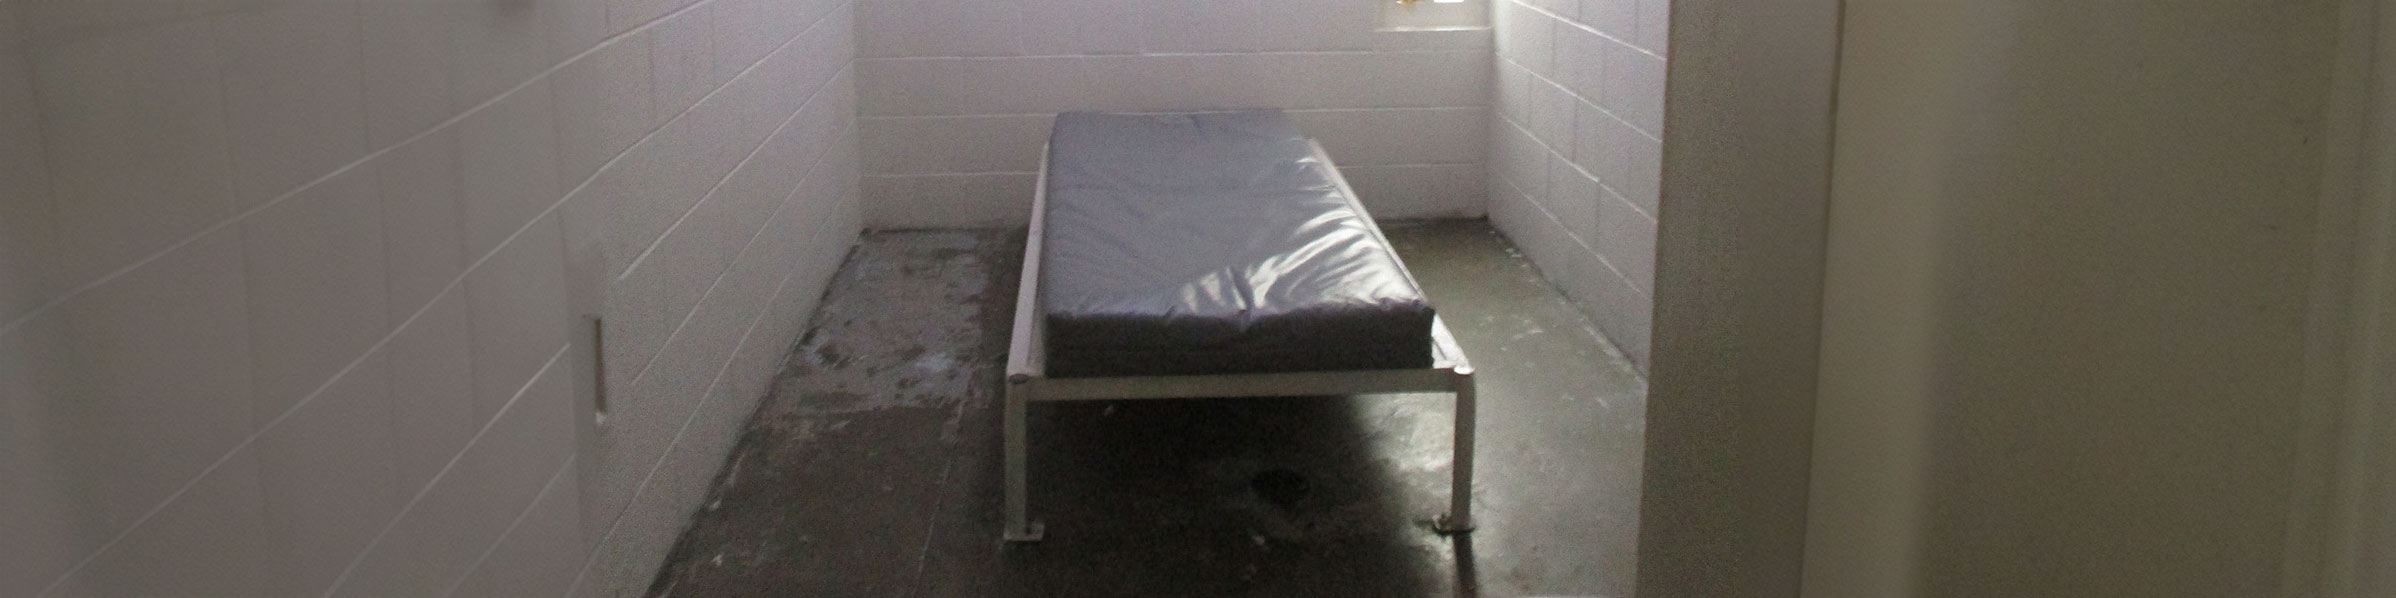 A cell at KCJC. The room has concrete floors and cinderblock walls, and is empty except for a bare mattress on a bed frame bolted to the floor and a metal toilet.